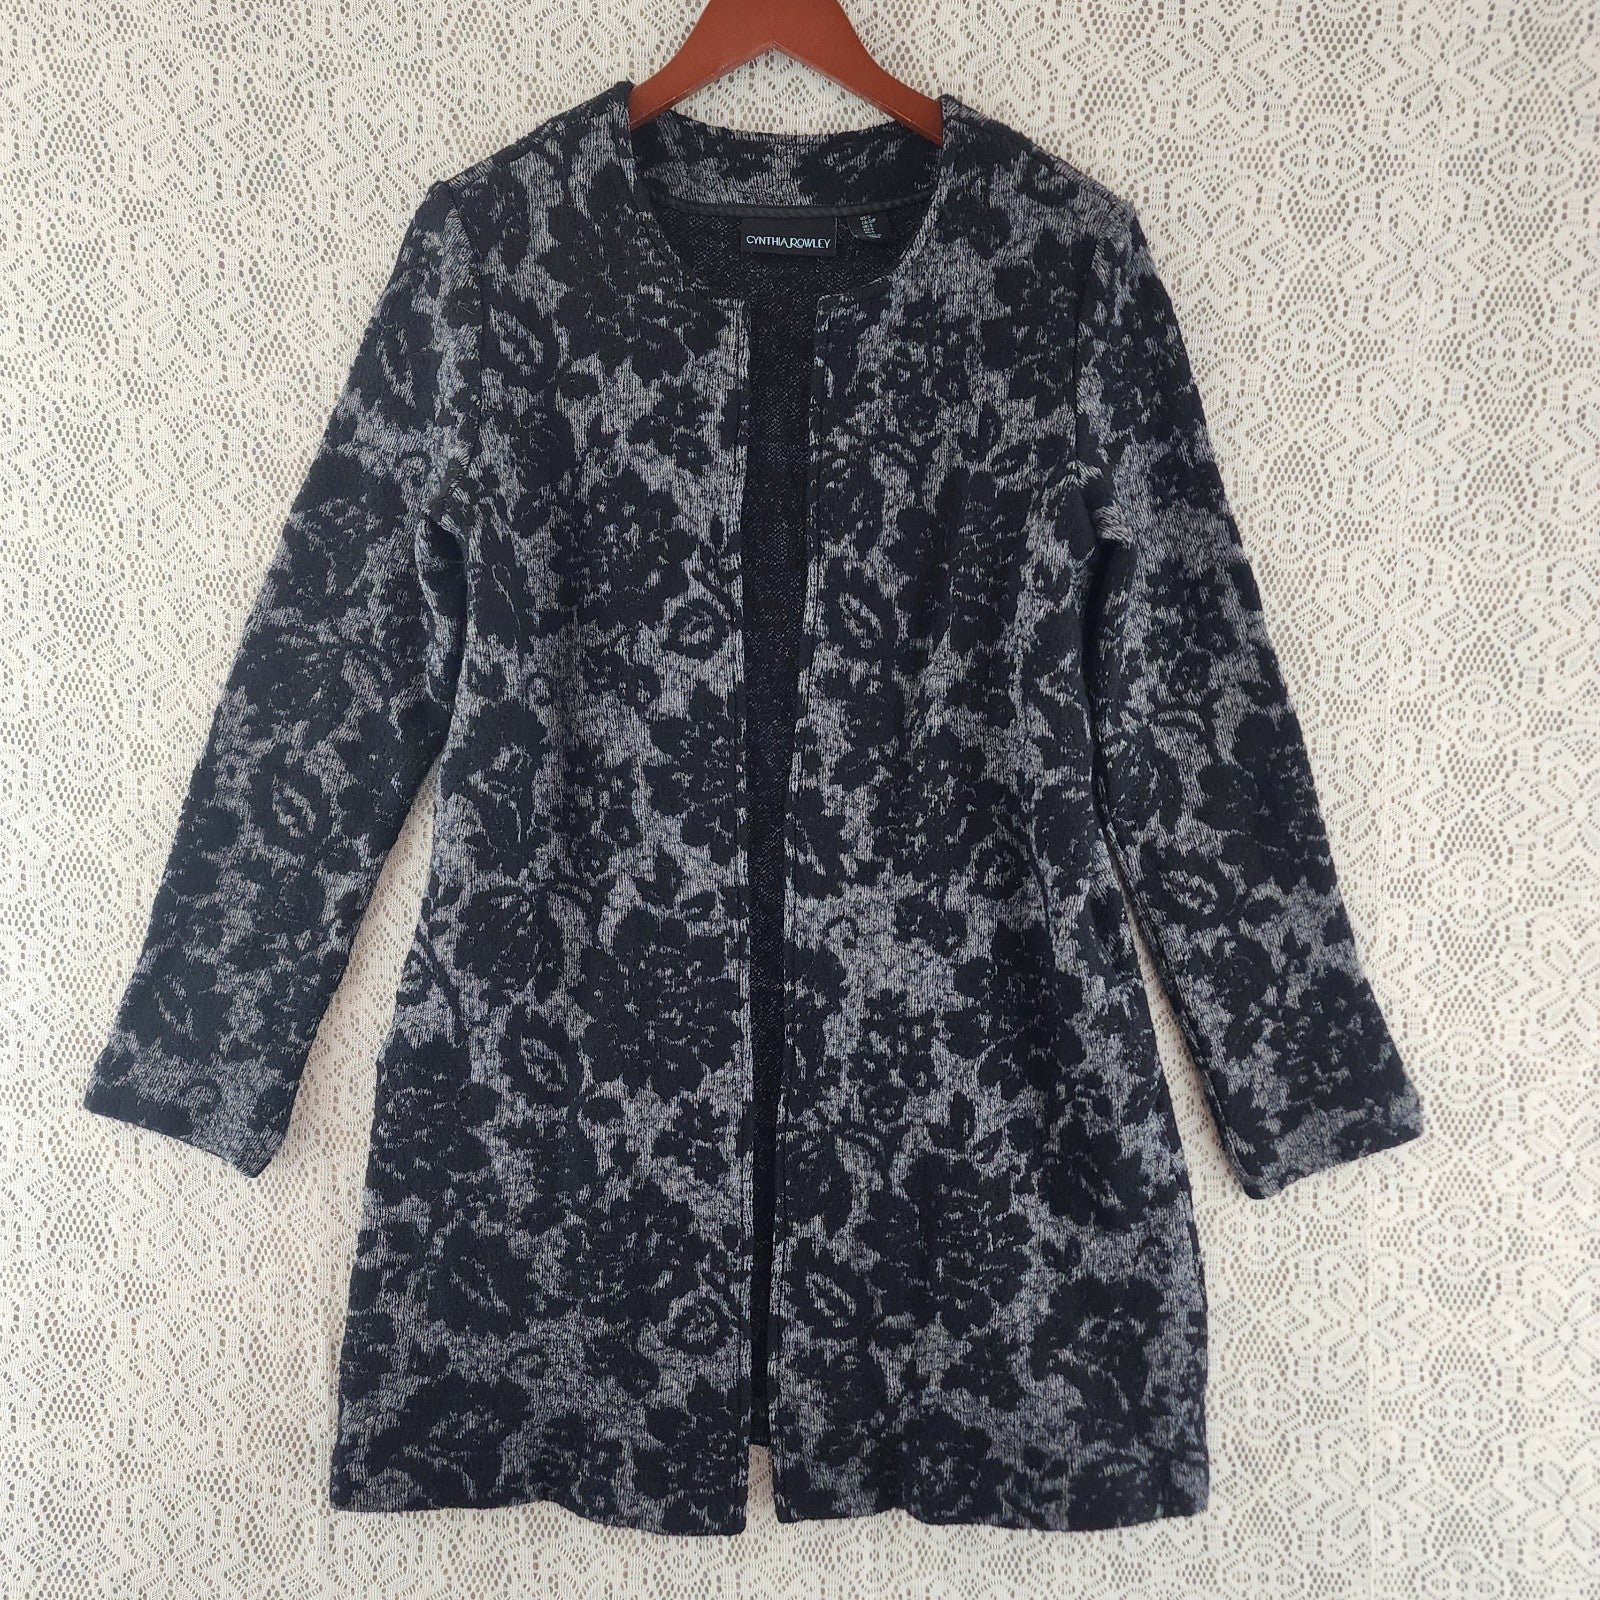 Classic Cynthia Rowley Wool Blend Floral Textured Open 